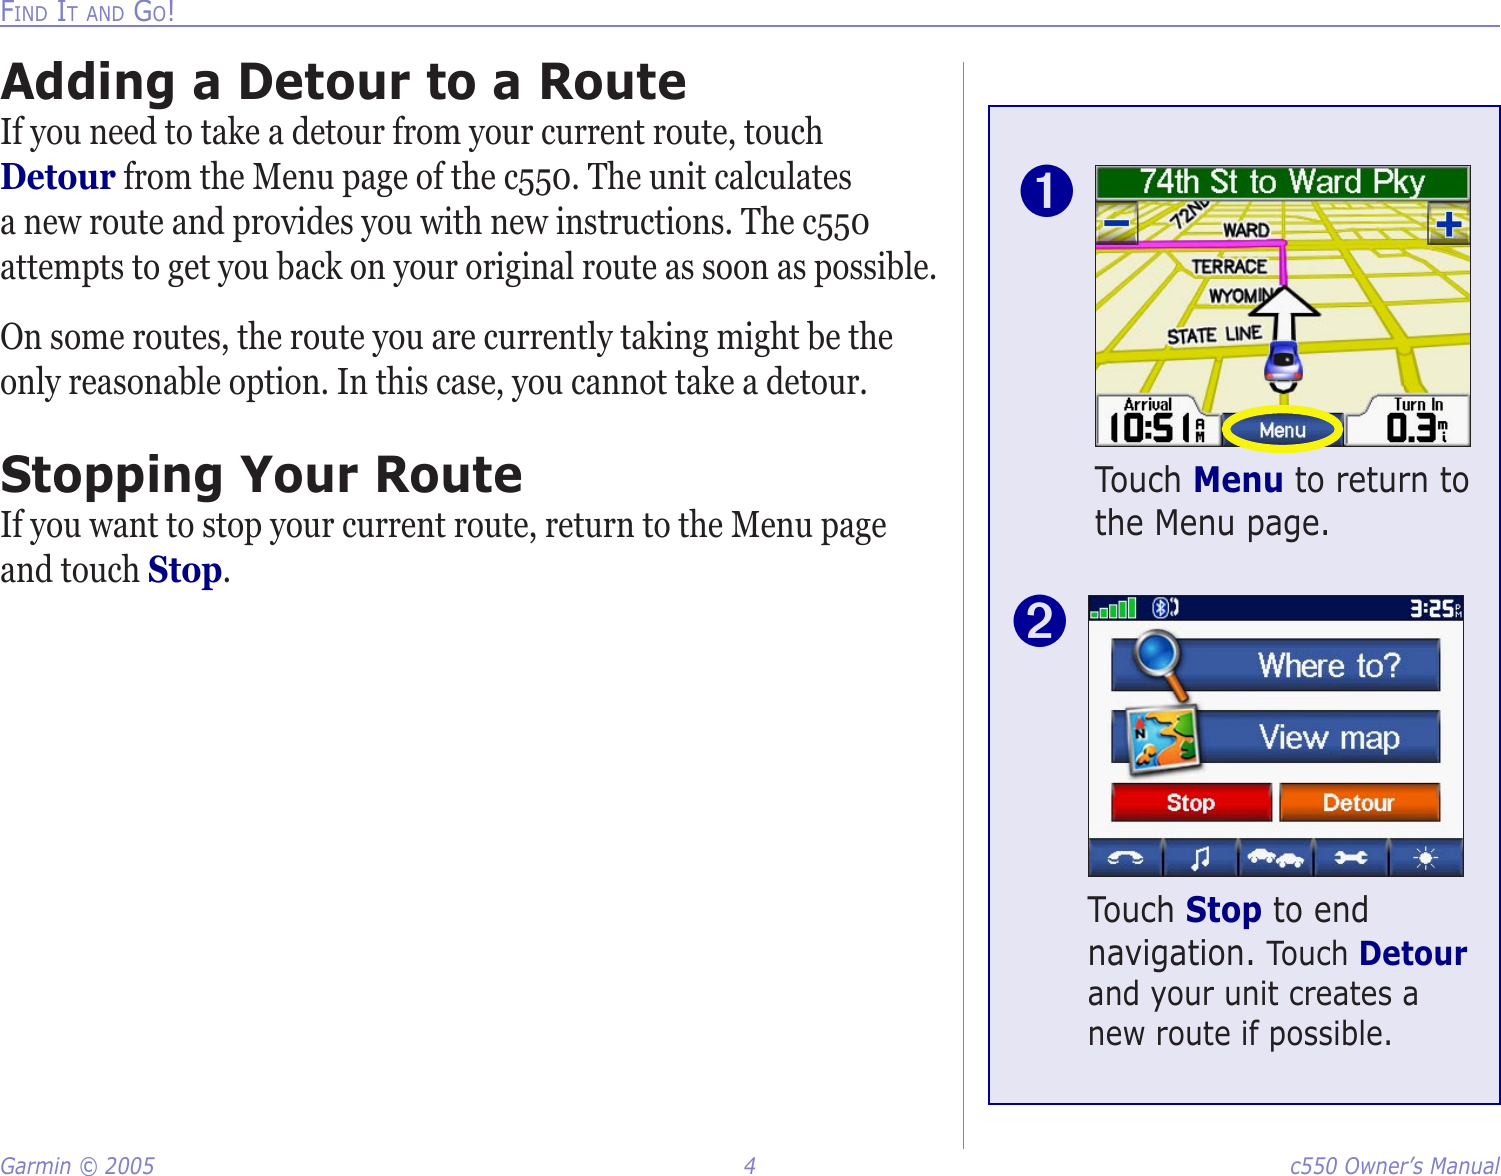 Garmin © 2005  4  c550 Owner’s ManualFIND IT AND GO!Touch Menu to return to the Menu page.➊Touch Stop to end navigation. Touch Detour and your unit creates a new route if possible.➋Adding a Detour to a RouteIf you need to take a detour from your current route, touch Detour from the Menu page of the c550. The unit calculates a new route and provides you with new instructions. The c550 attempts to get you back on your original route as soon as possible.On some routes, the route you are currently taking might be the only reasonable option. In this case, you cannot take a detour. Stopping Your RouteIf you want to stop your current route, return to the Menu page and touch Stop. 